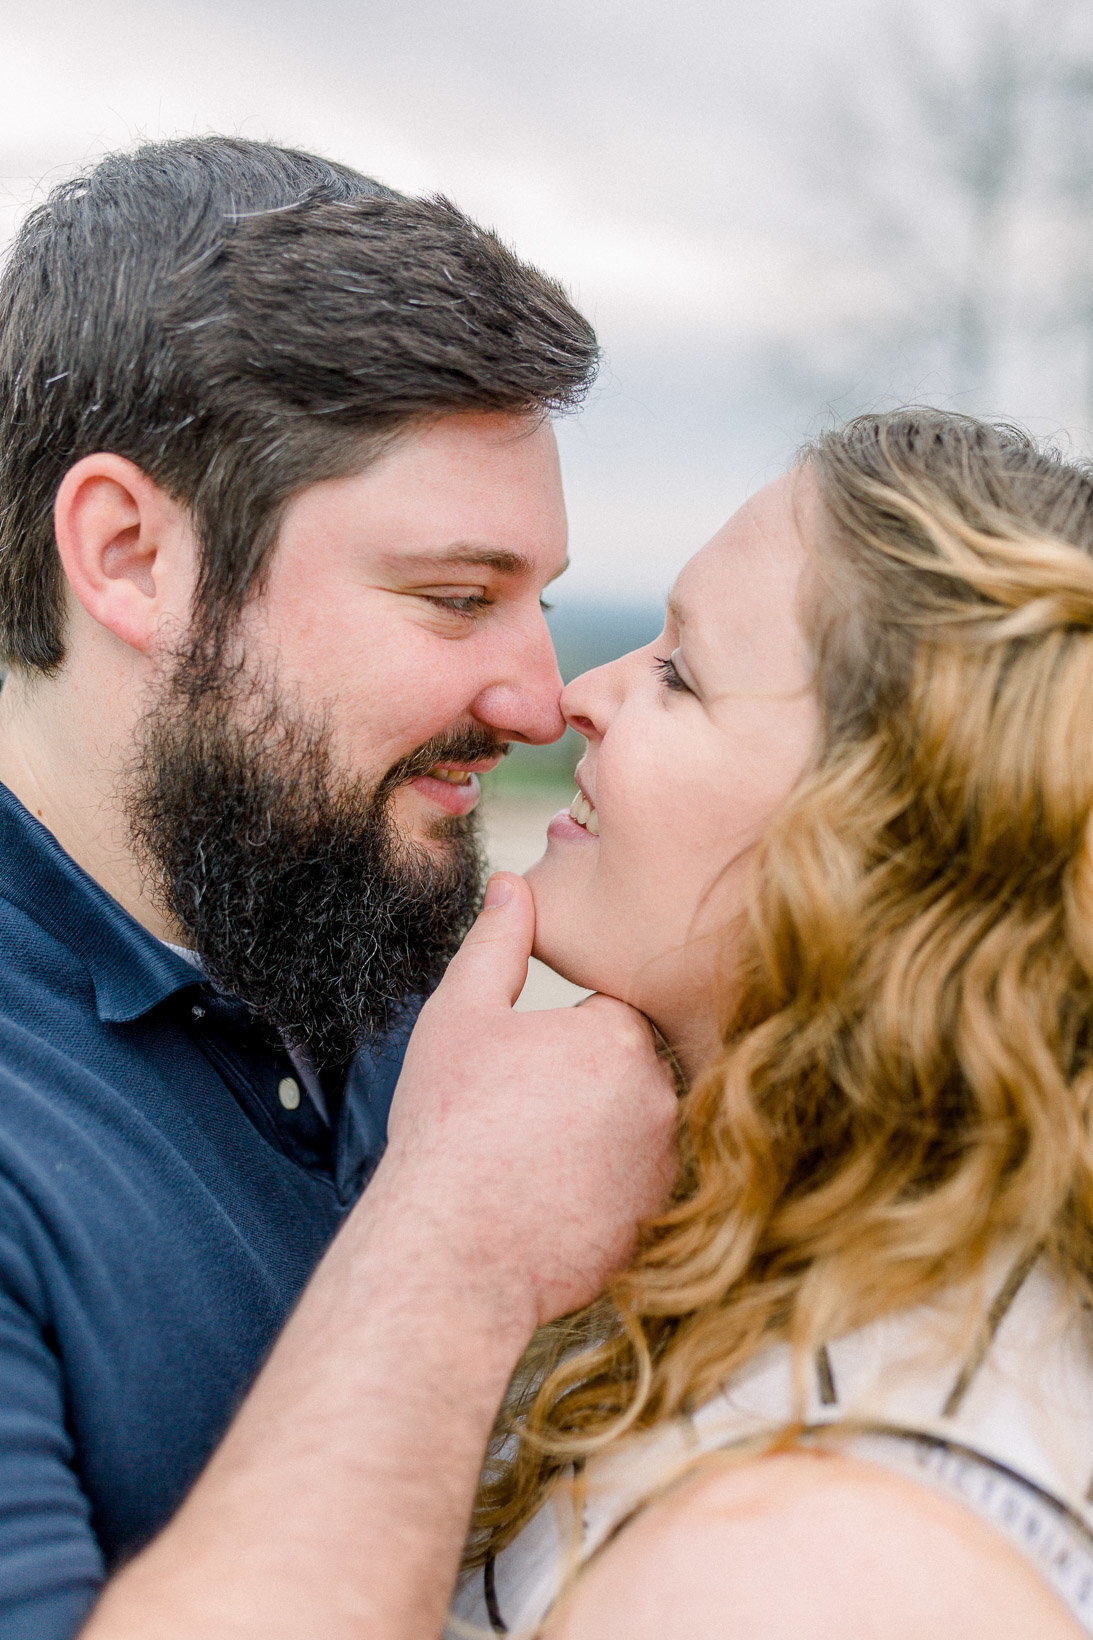 Intimate moment between couple captured by Staci Addison Photography